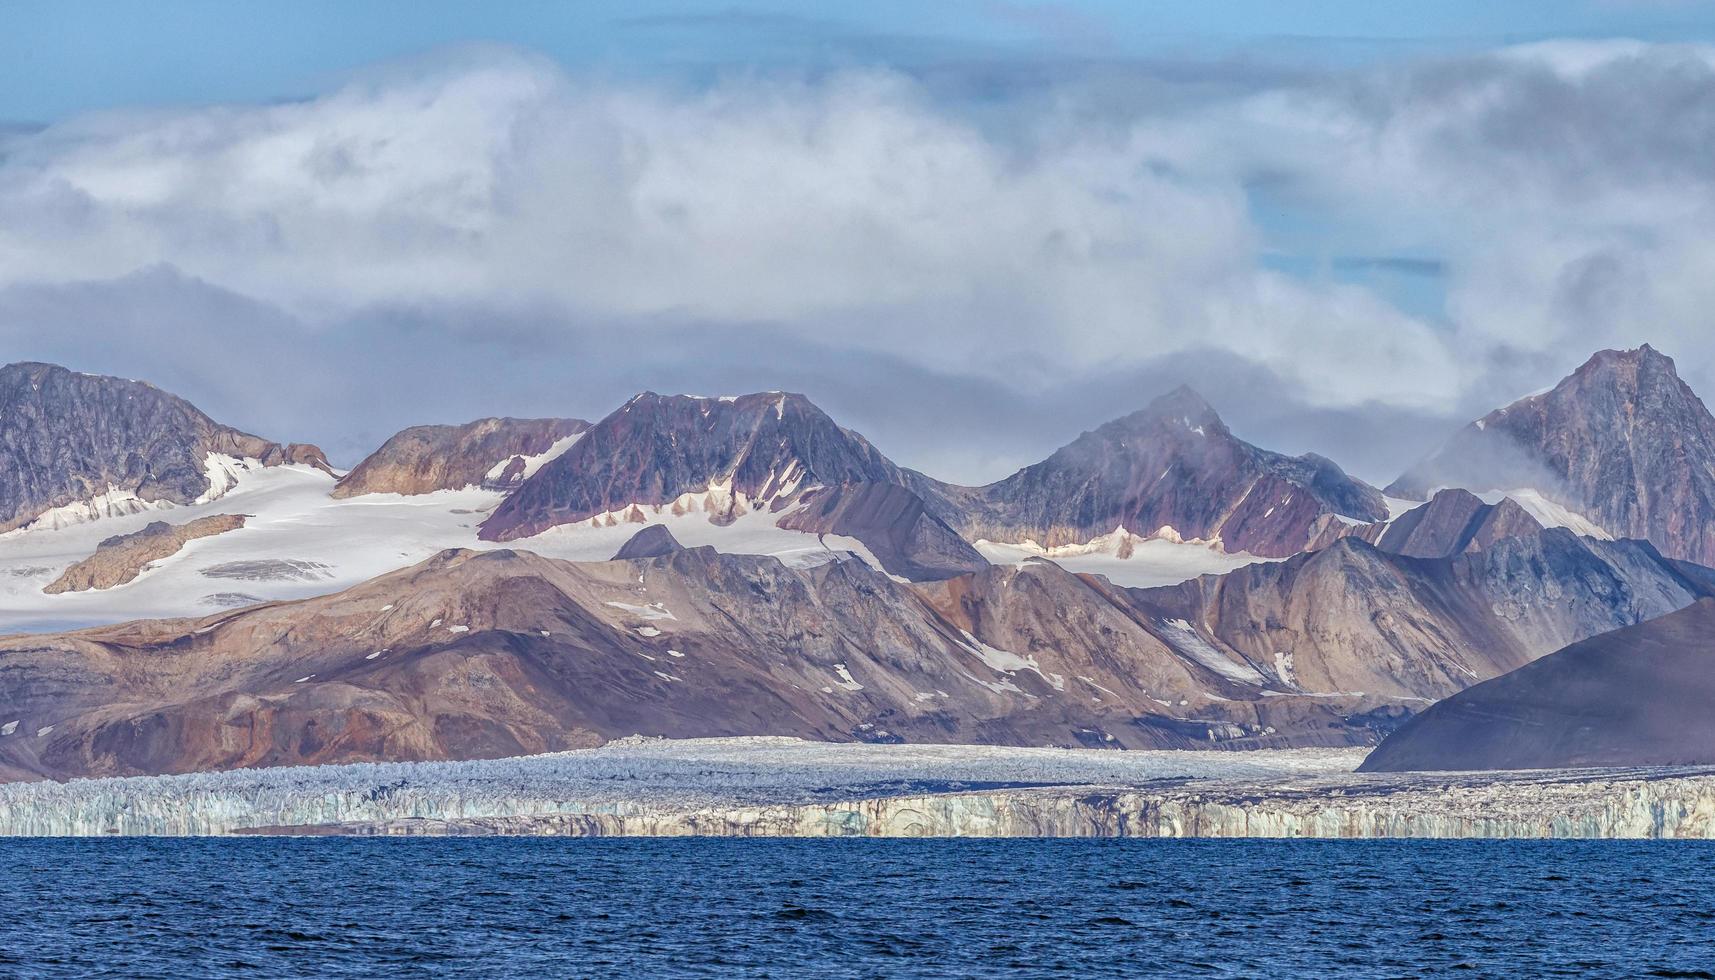 Close to the North Pole you find this beautiful landscape at Svalbard Spitsbergen photo